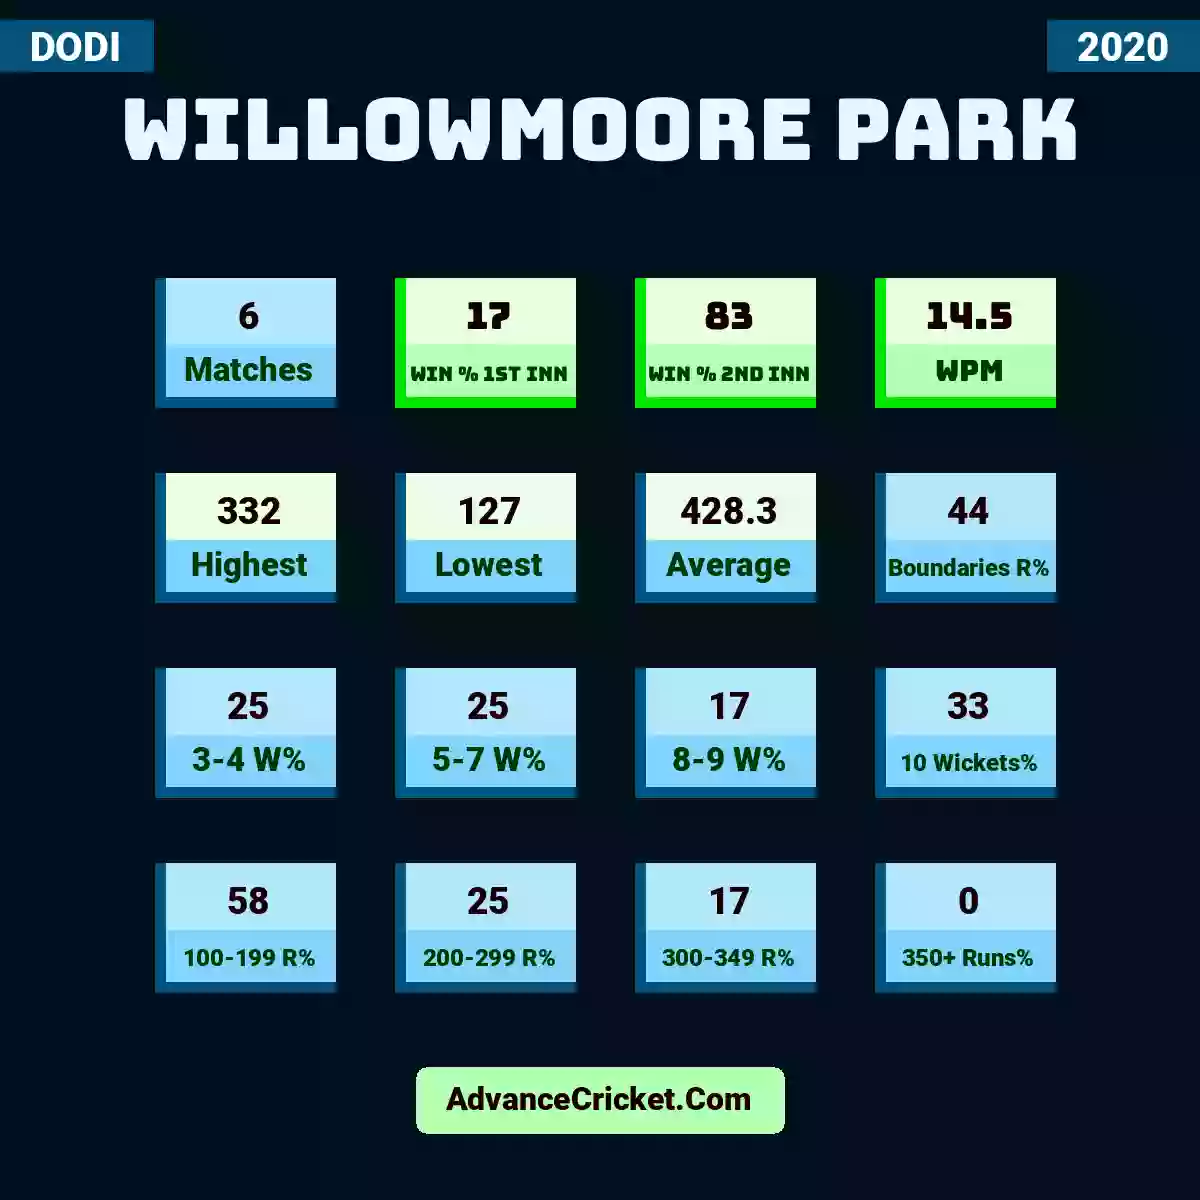 Image showing Willowmoore Park with Matches: 6, Win % 1st Inn: 17, Win % 2nd Inn: 83, WPM: 14.5, Highest: 332, Lowest: 127, Average: 428.3, Boundaries R%: 44, 3-4 W%: 25, 5-7 W%: 25, 8-9 W%: 17, 10 Wickets%: 33, 100-199 R%: 58, 200-299 R%: 25, 300-349 R%: 17, 350+ Runs%: 0.